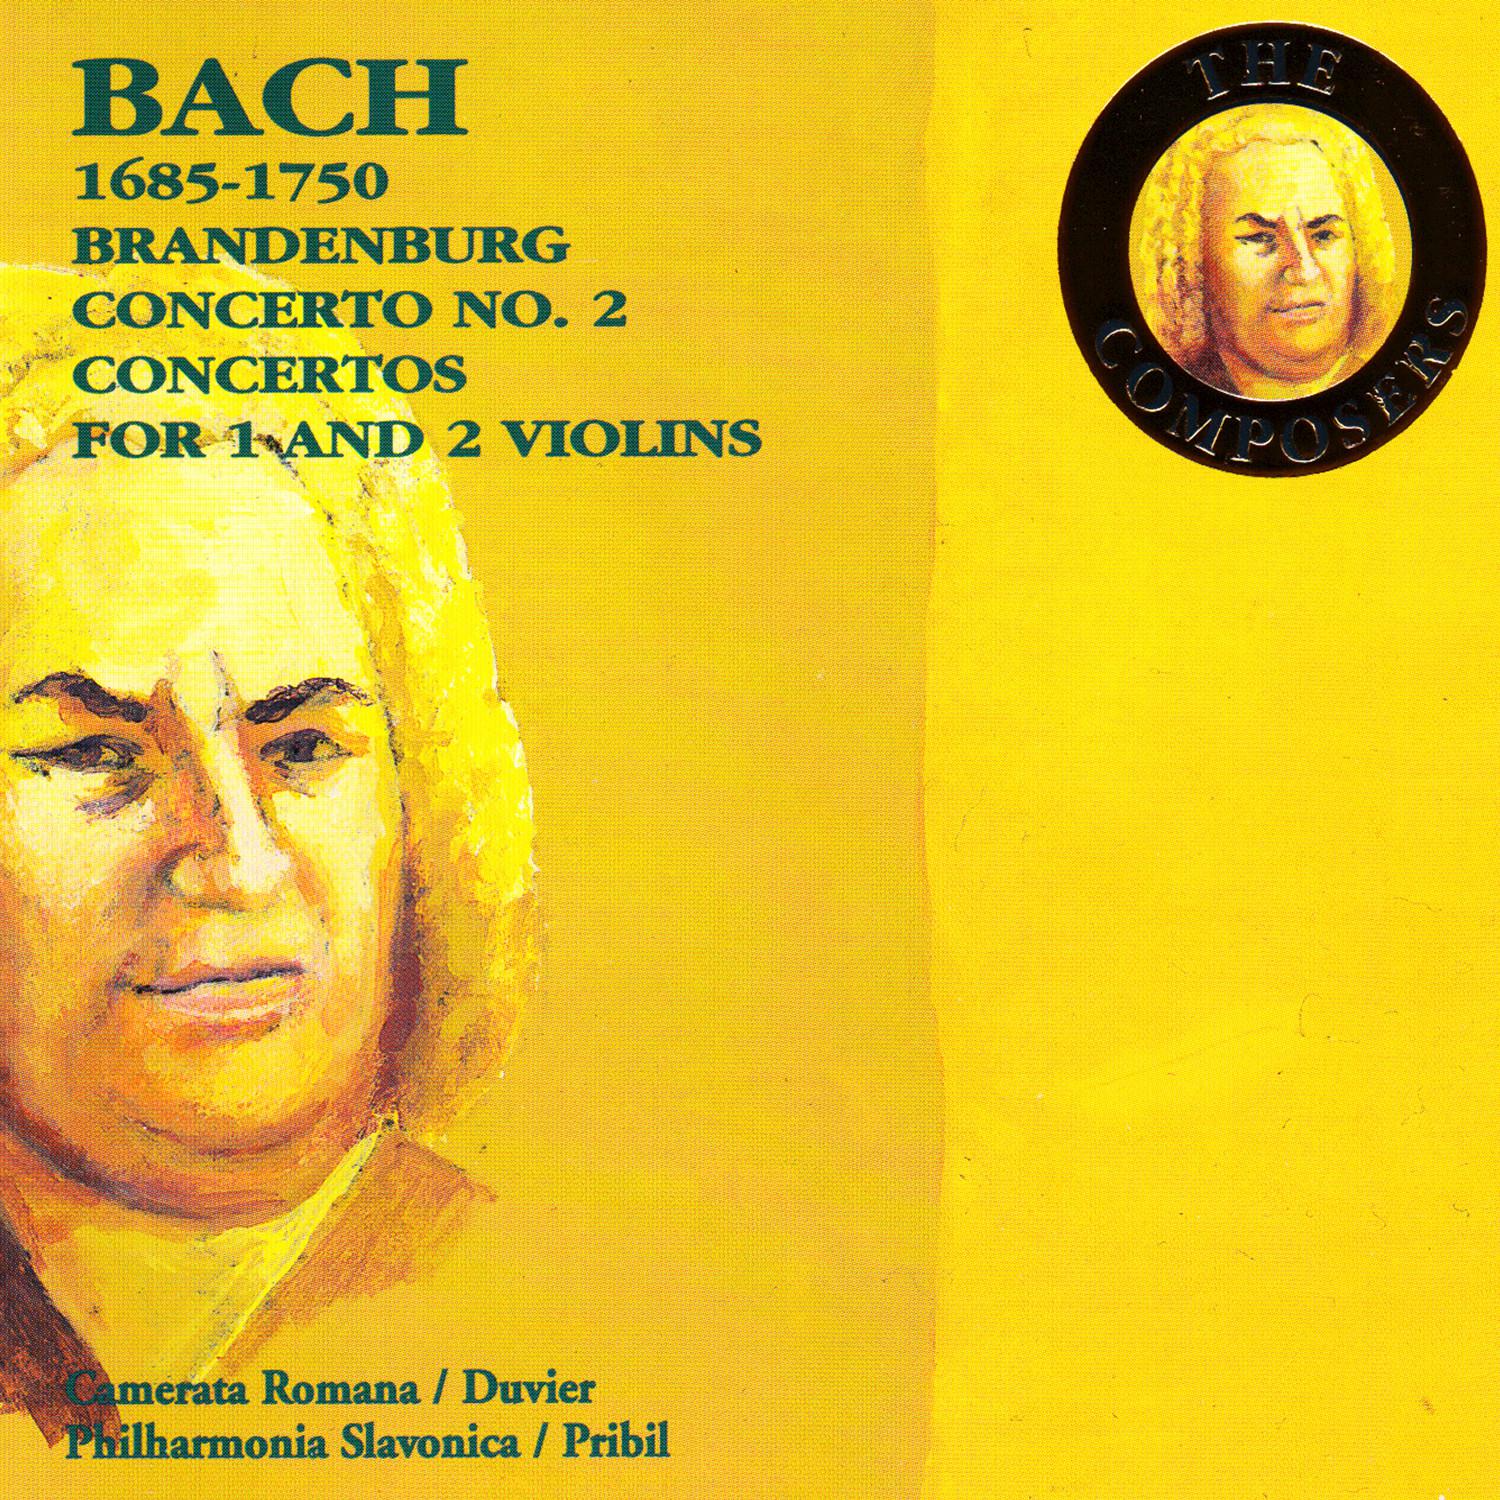 Concerto for 2 Violins, Strings and Basso in D Minor, BWV 1043: Allegro